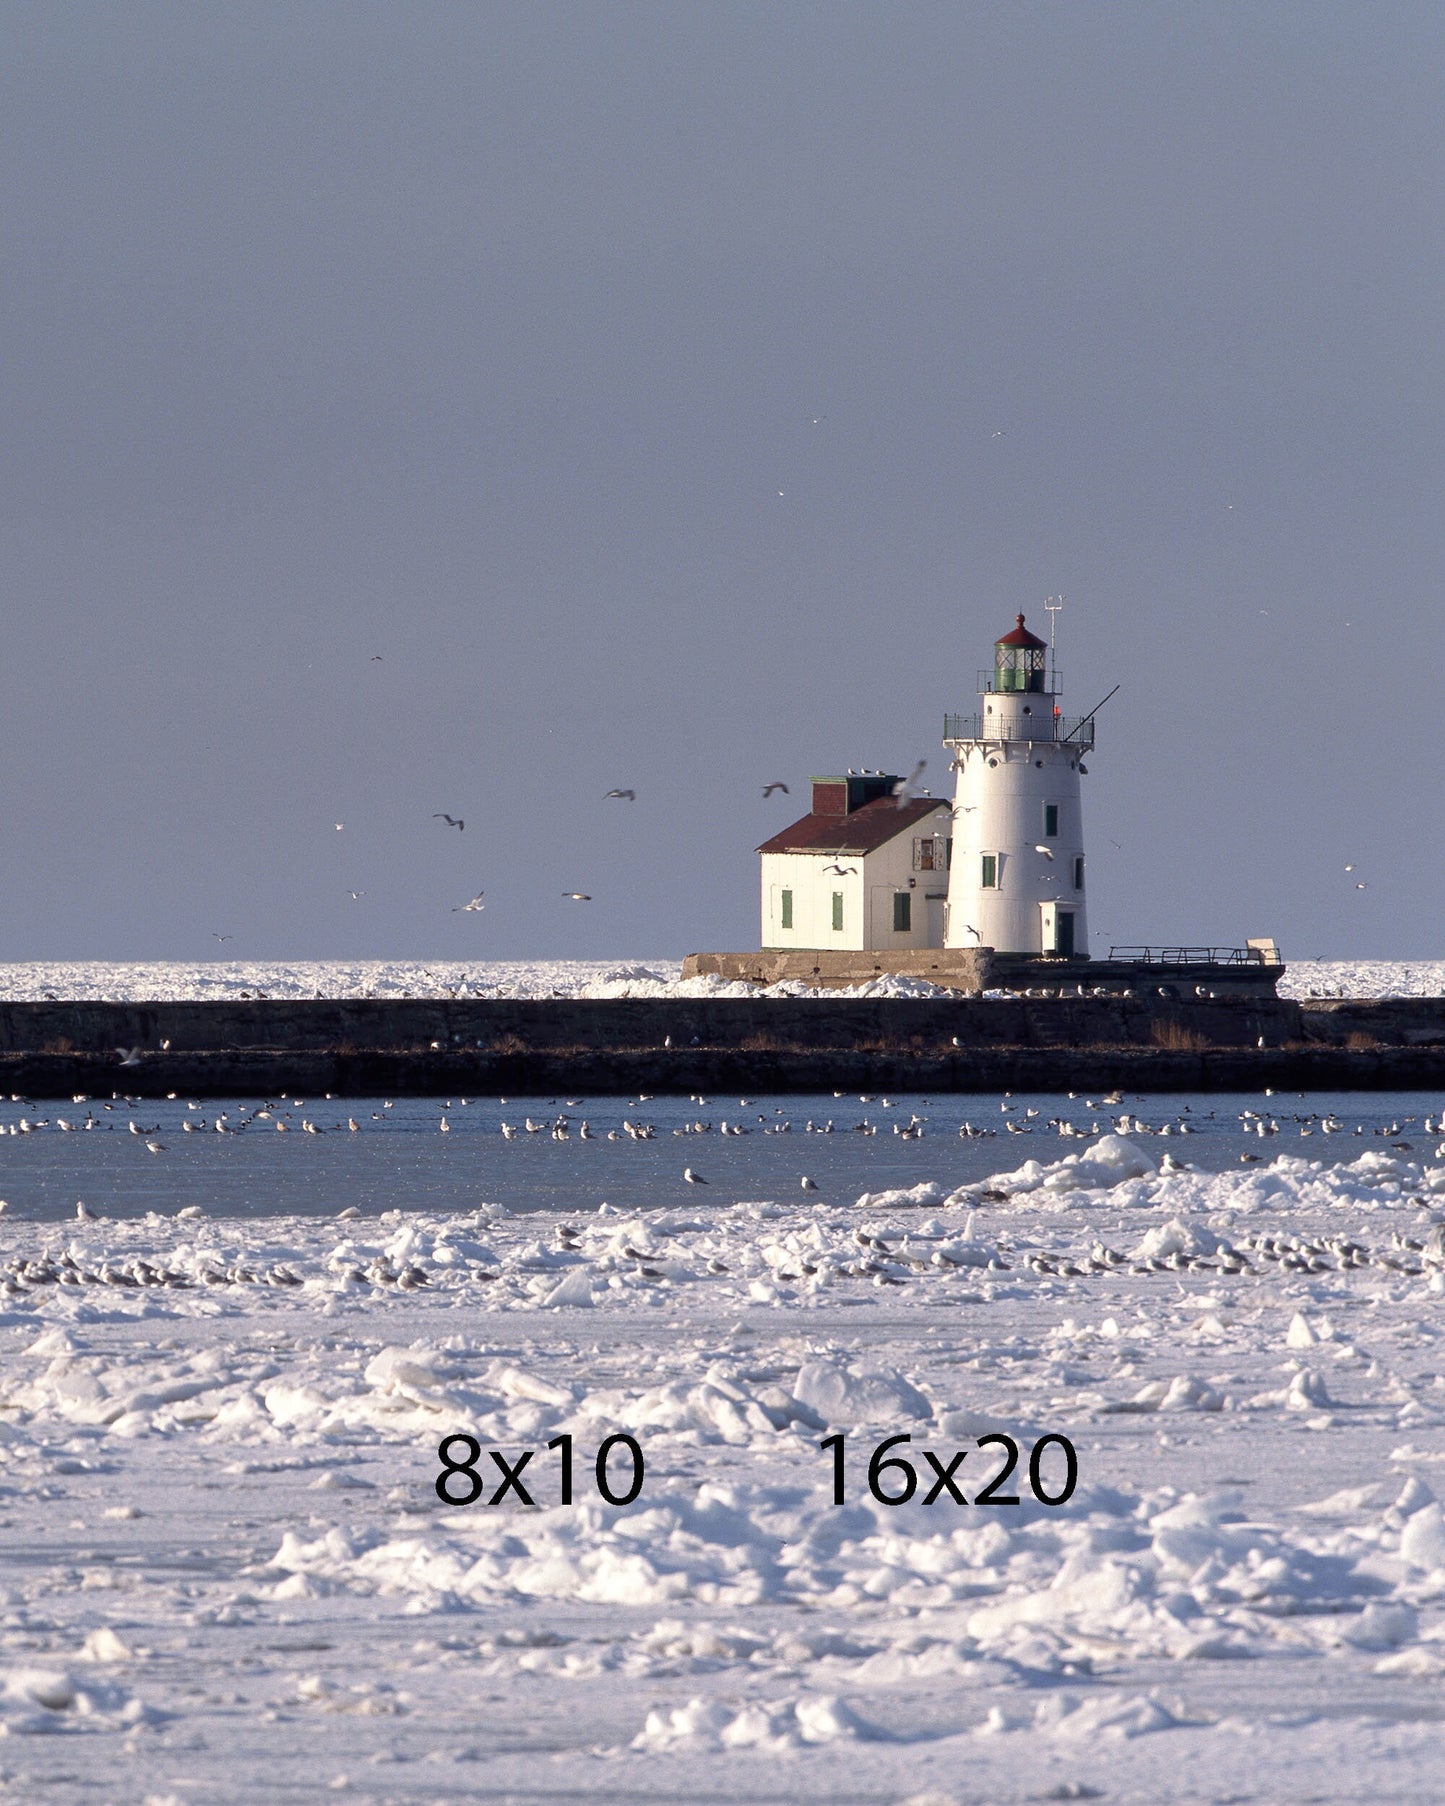 Cleveland Lighthouse in the Winter Lake Erie Art